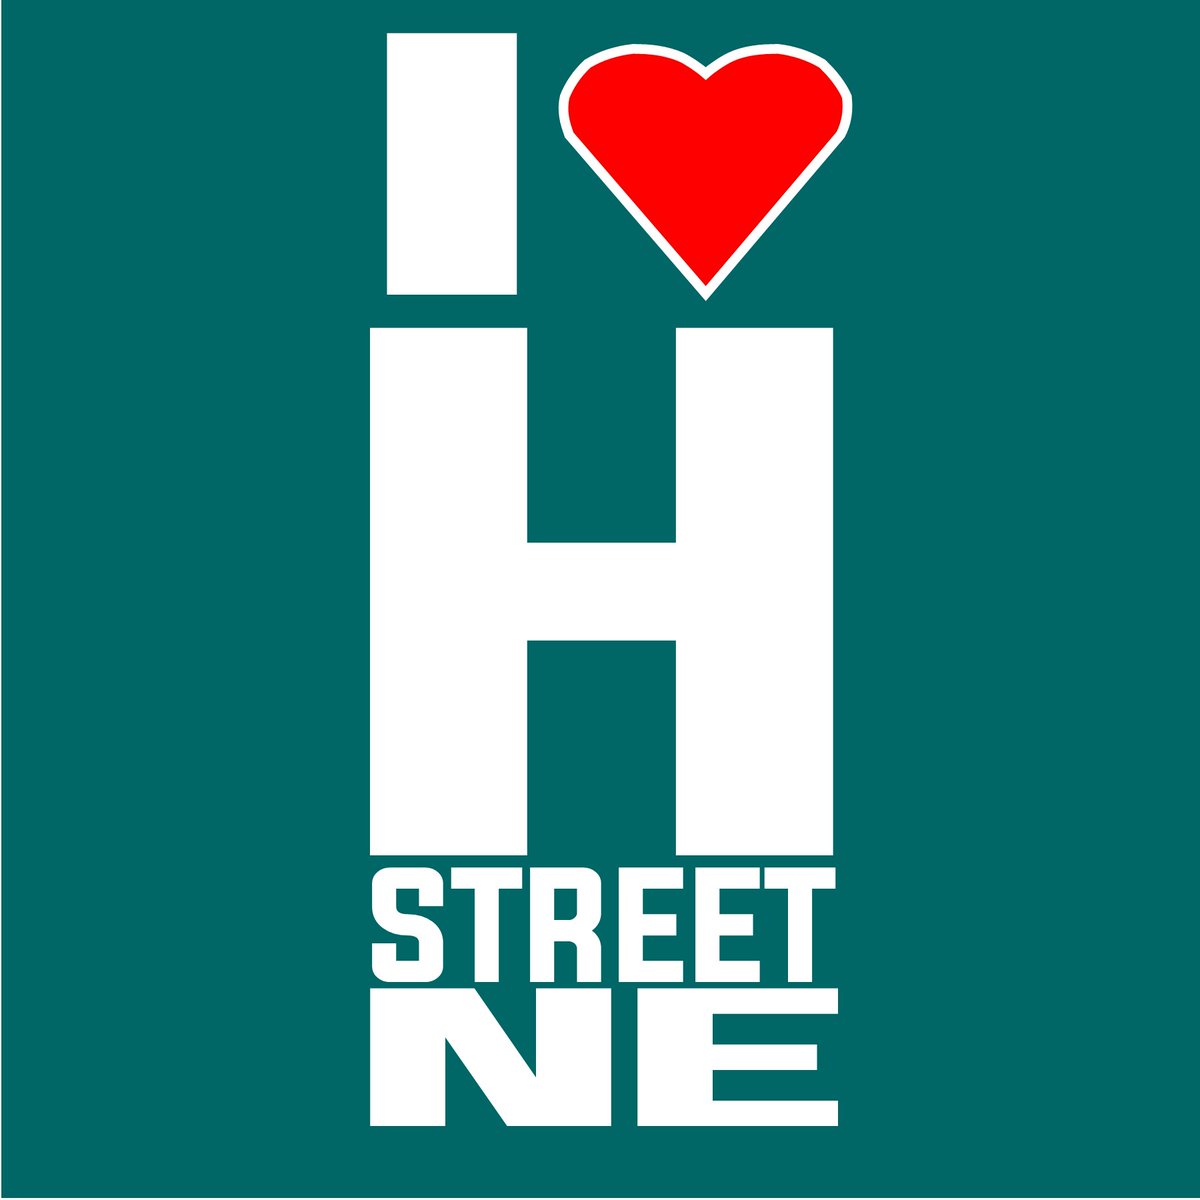 Get Ready for the #I❤HStreetNE Campaign!  Stay tuned for more details & special offers! #shopsmall #smallbizdc #hstreetne #hstreetstrong #supportyourneighborhood #weareinthistogether